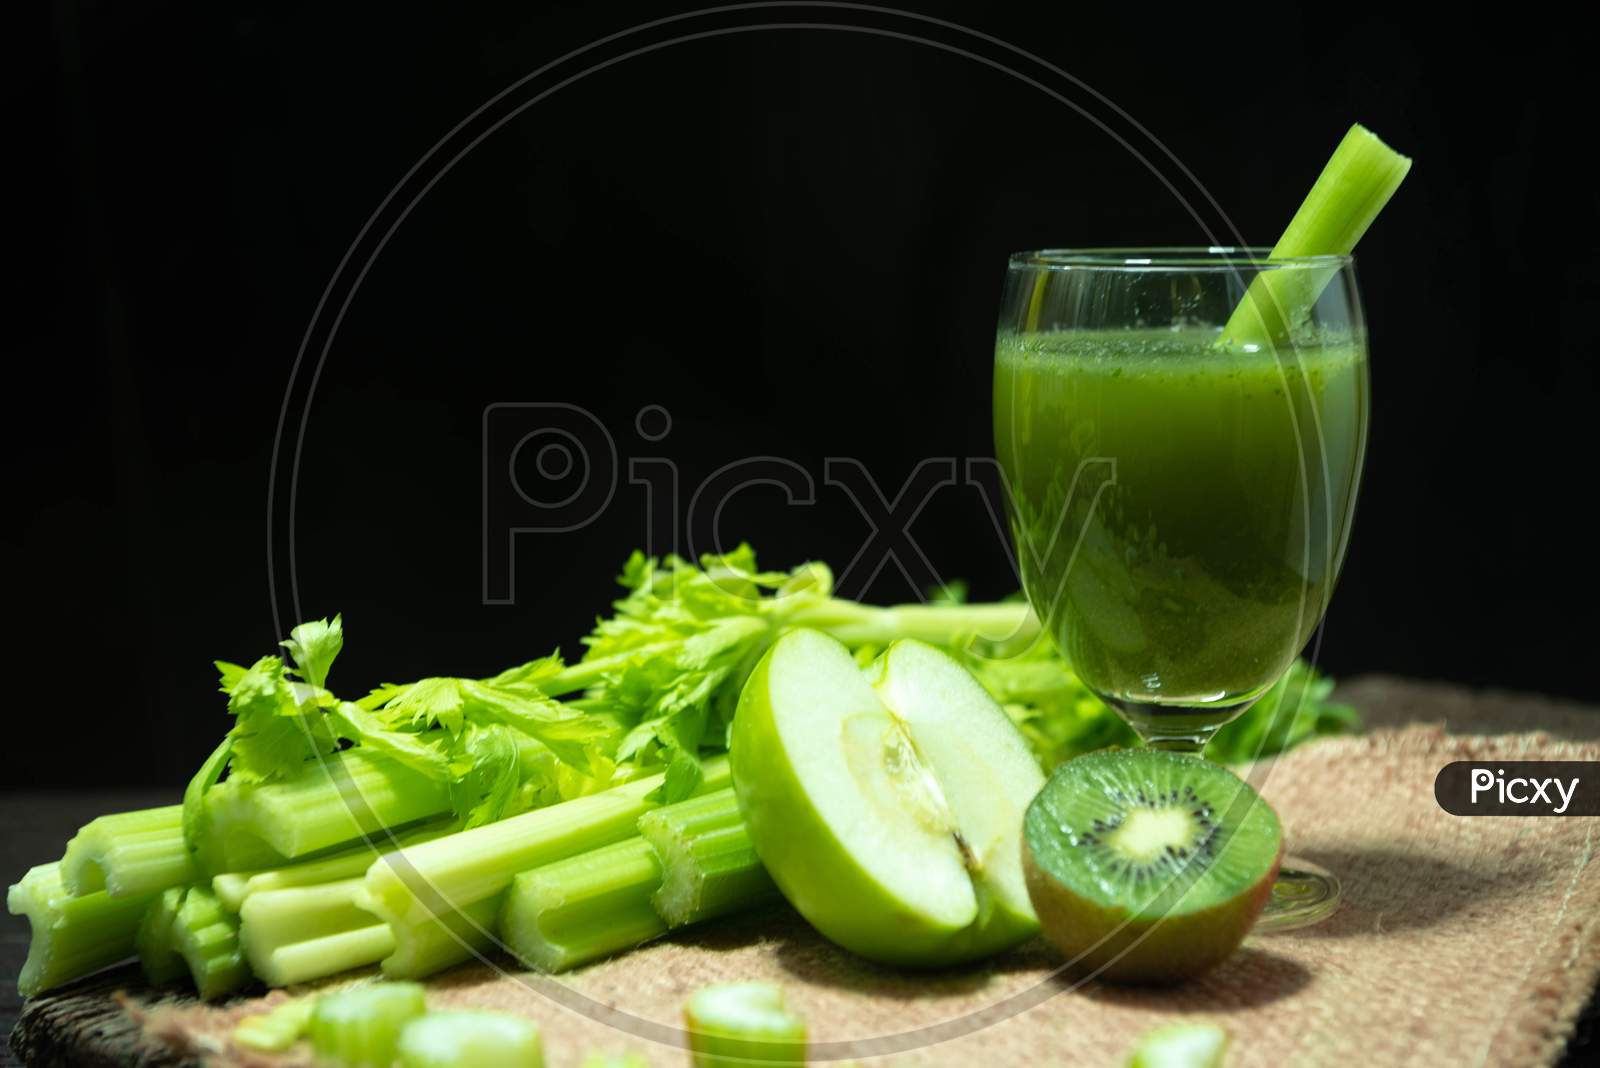 Blended Mixed Juice Celery And Kiwi And Green Apple In Welcome Drink Glass And Bunch Of Fresh Celery Stalk On Wooden Table With Leaves On Black Background. Food And Ingredients  Of Healthy Vegetable.